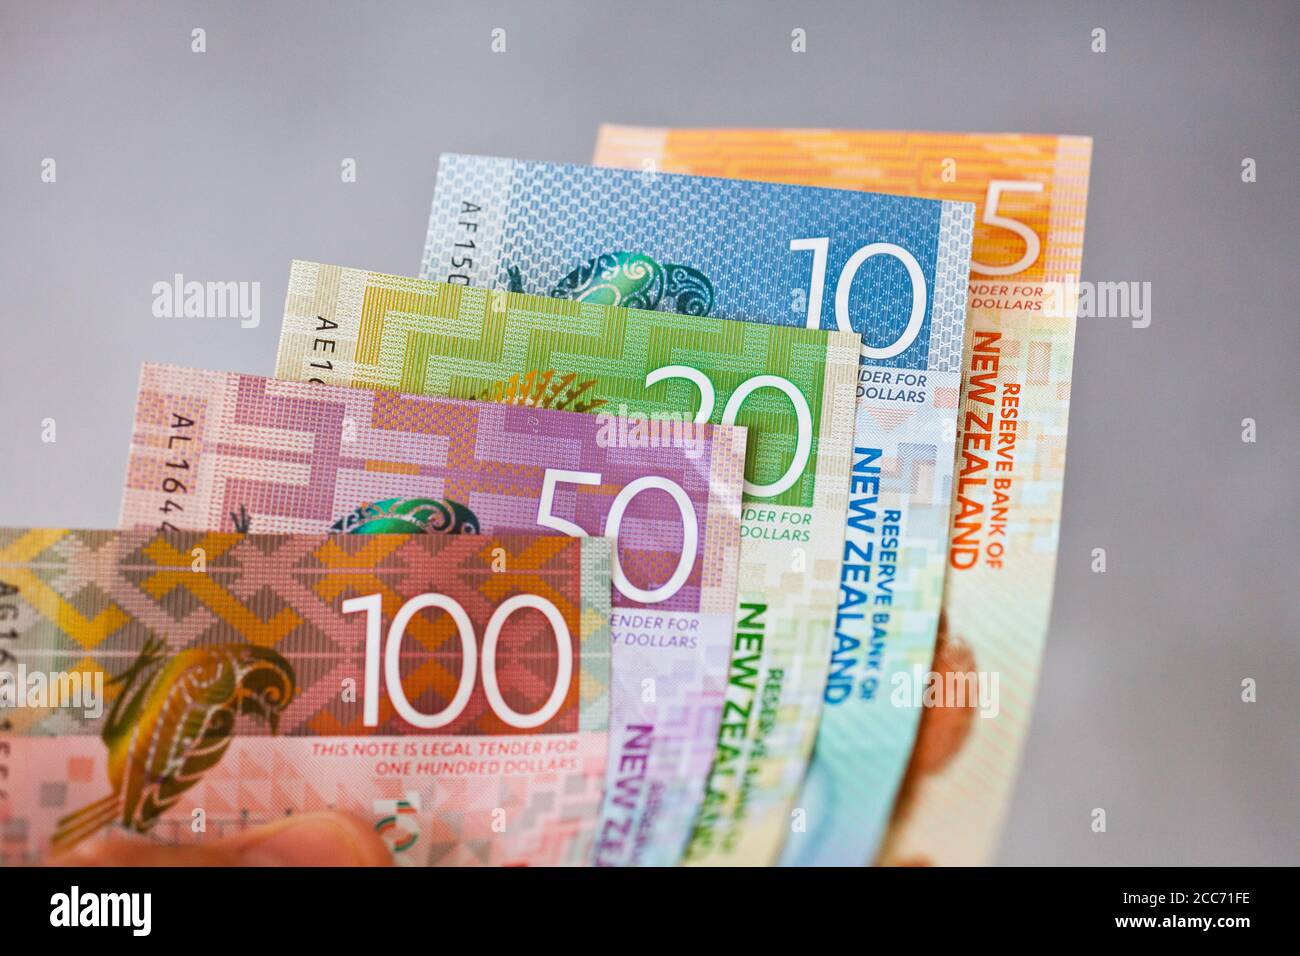 New Zealand cash, money or currency held fanned out on a gray background Stock Photo